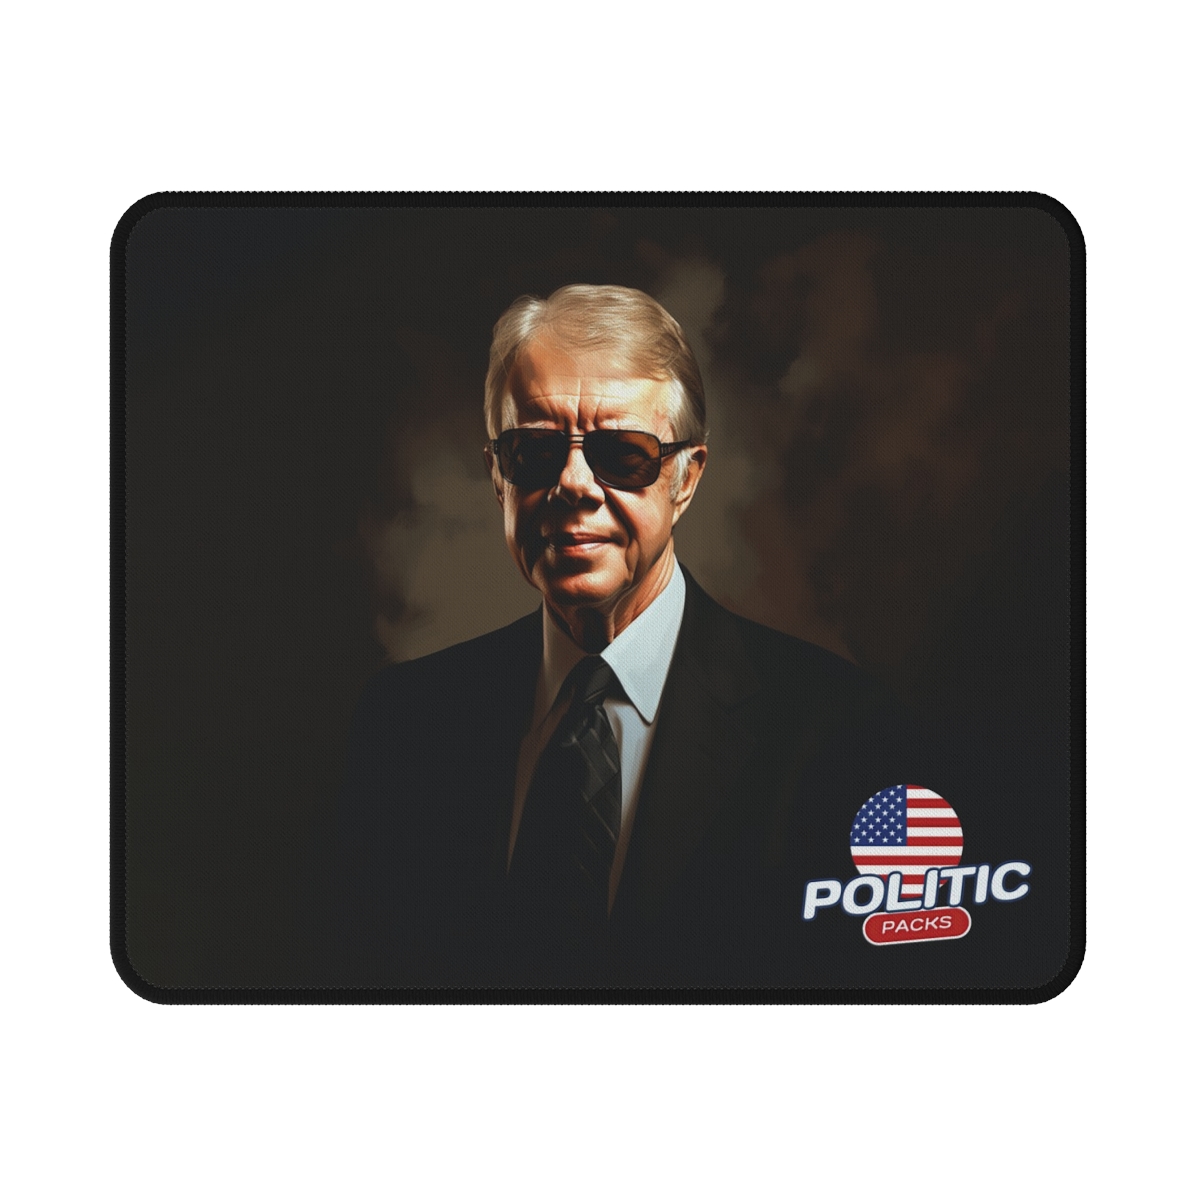 Jimmy Carter Legacy Mouse Pad – Politic Packs Edition